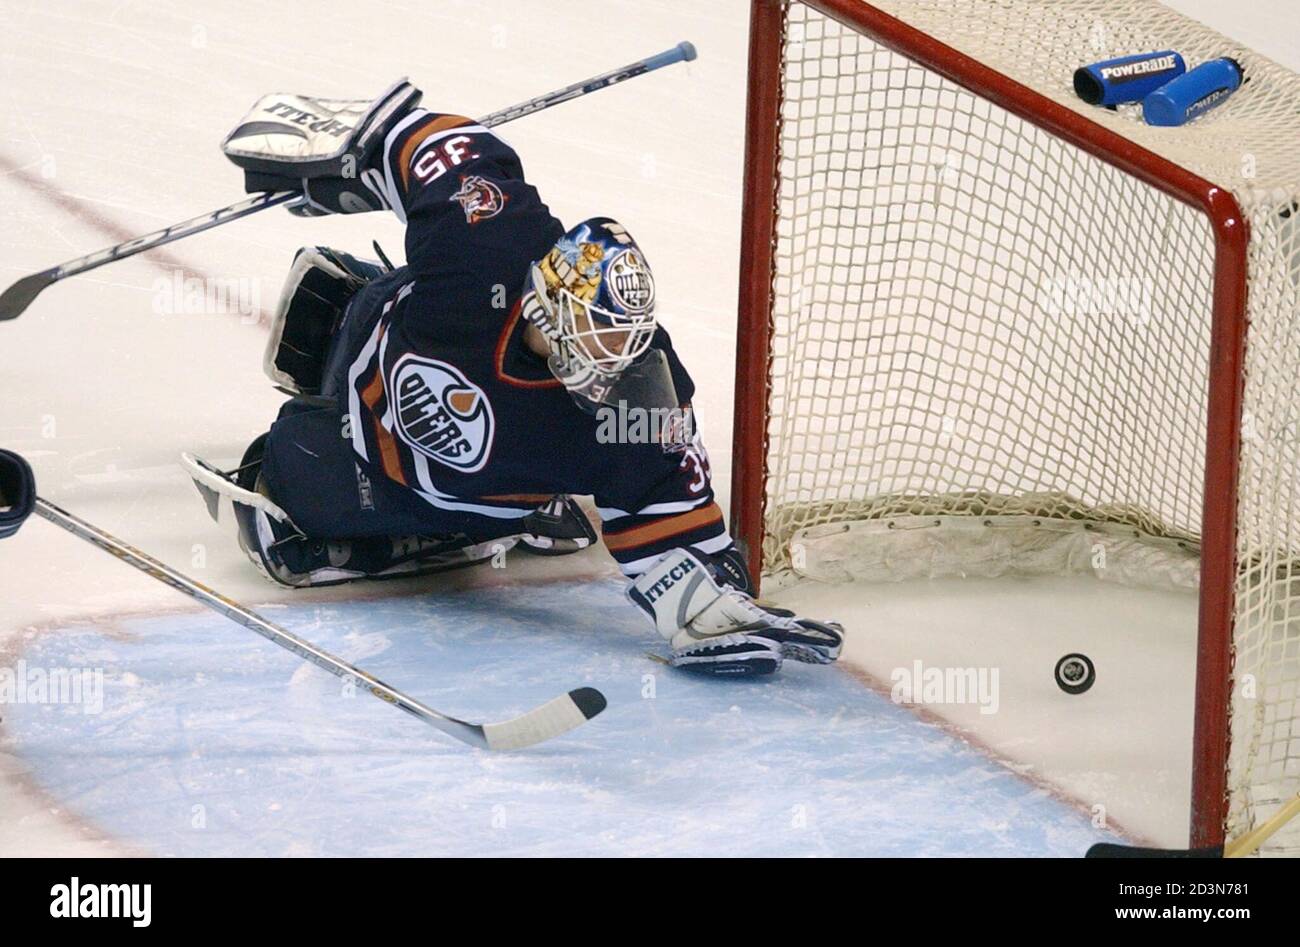 Edmonton Oilers Goalie Tommy Salo Watches A Puck Go By Off A Shot By The San